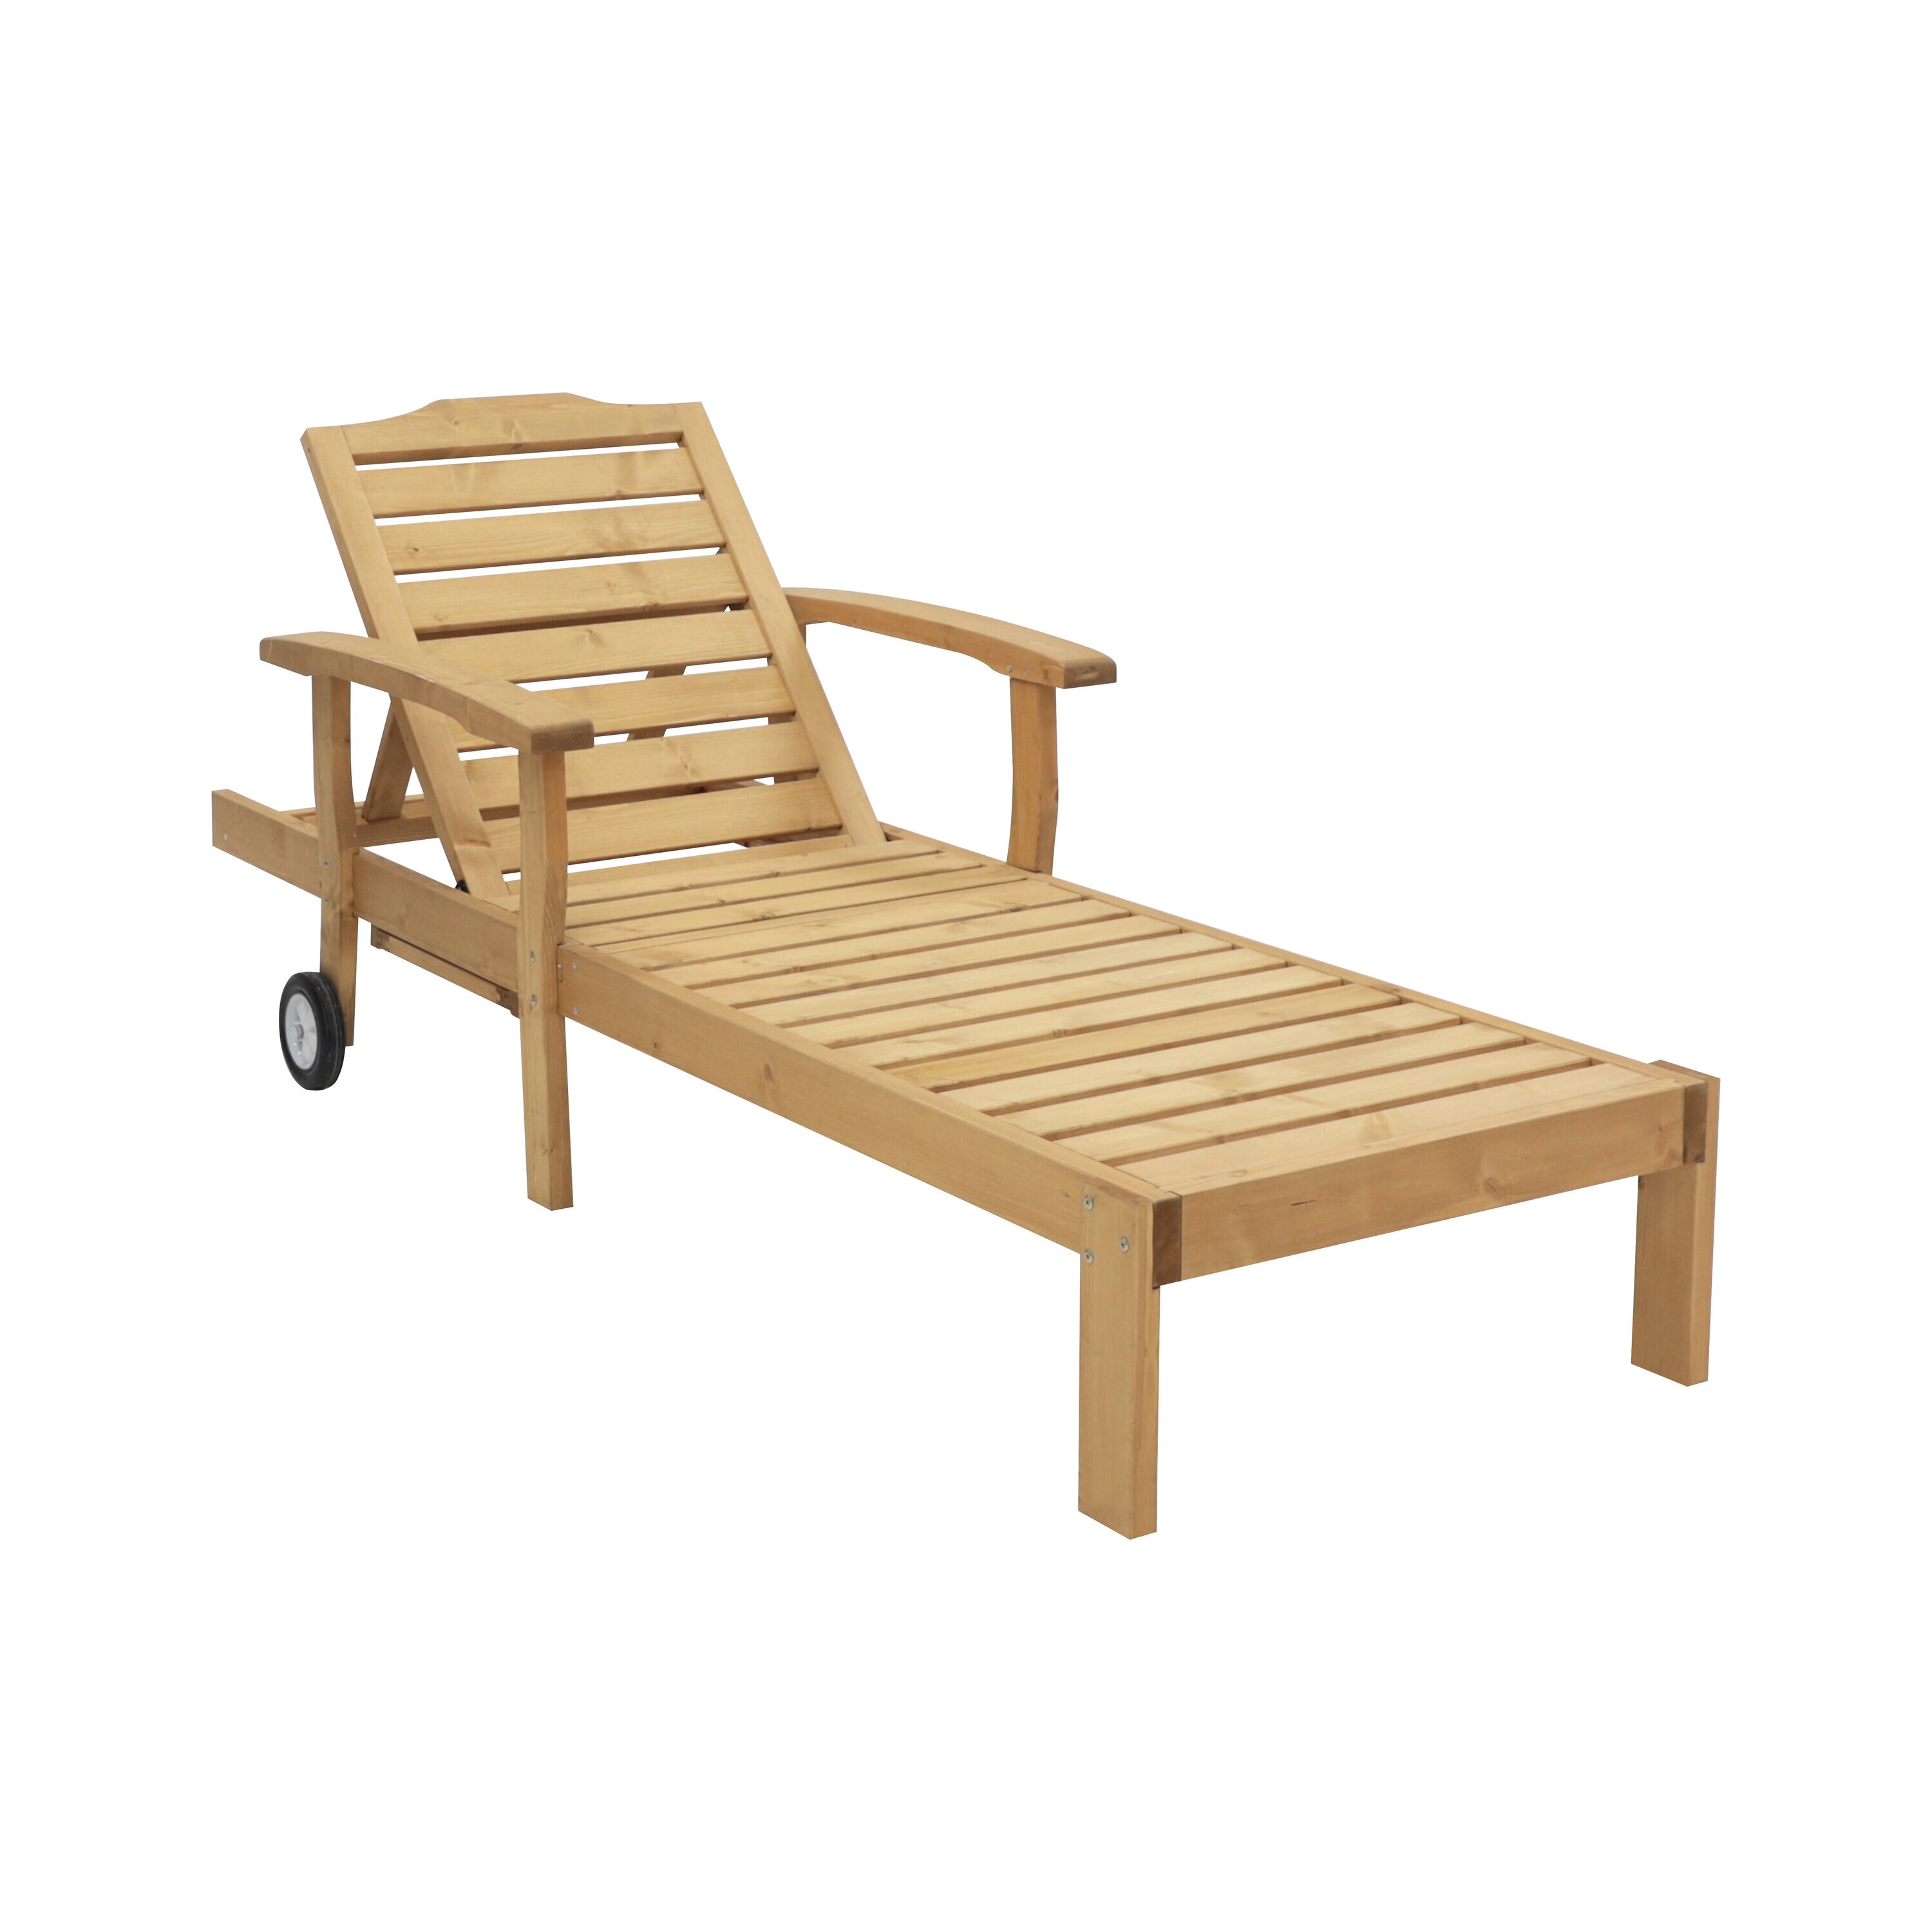 Chaise Lounge Wood Patio Chairs At Lowes.Com